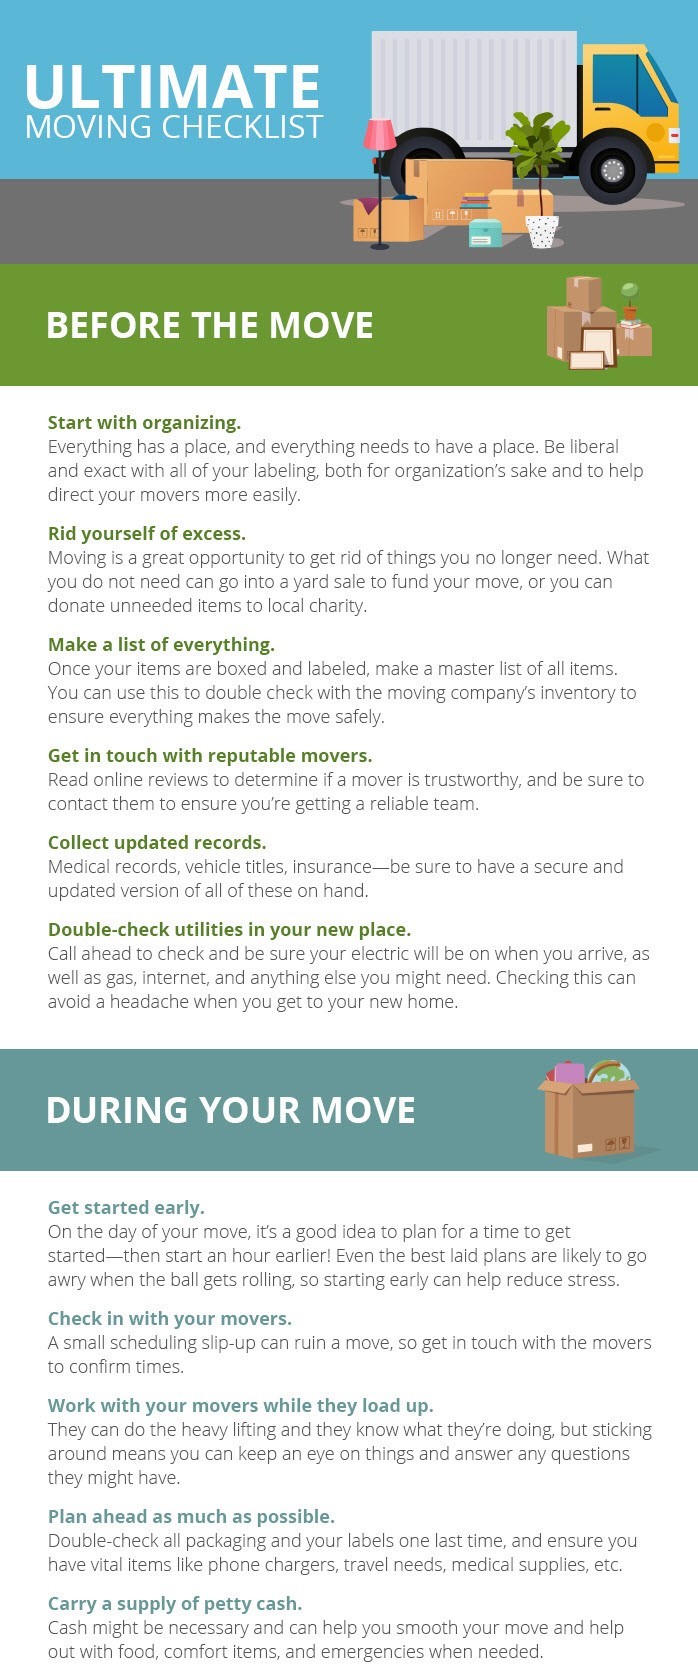 New home checklist: The ultimate guide to moving in